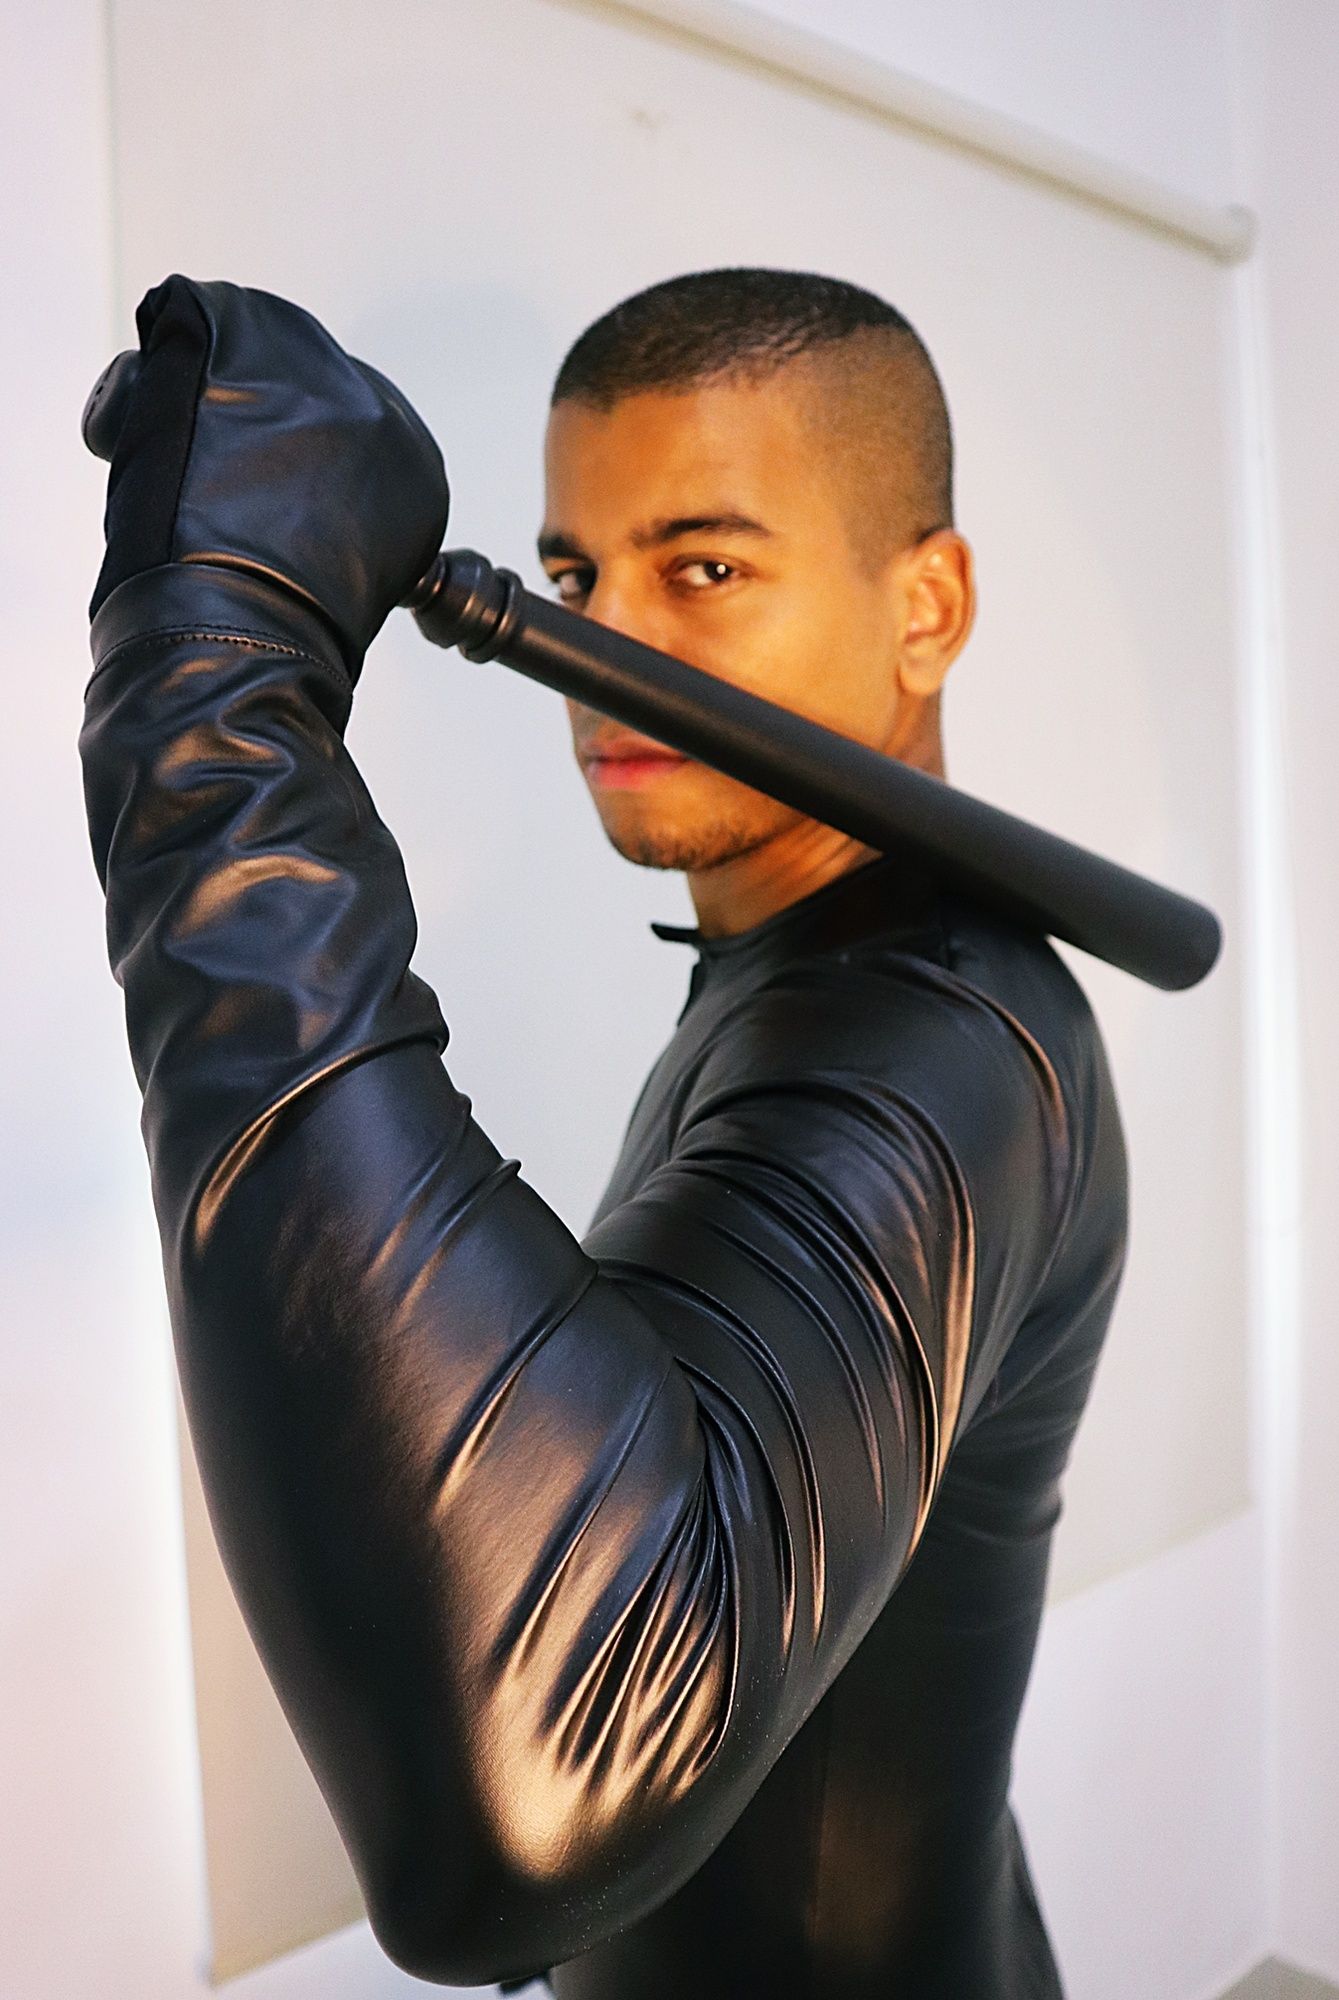 The rubber dom #14